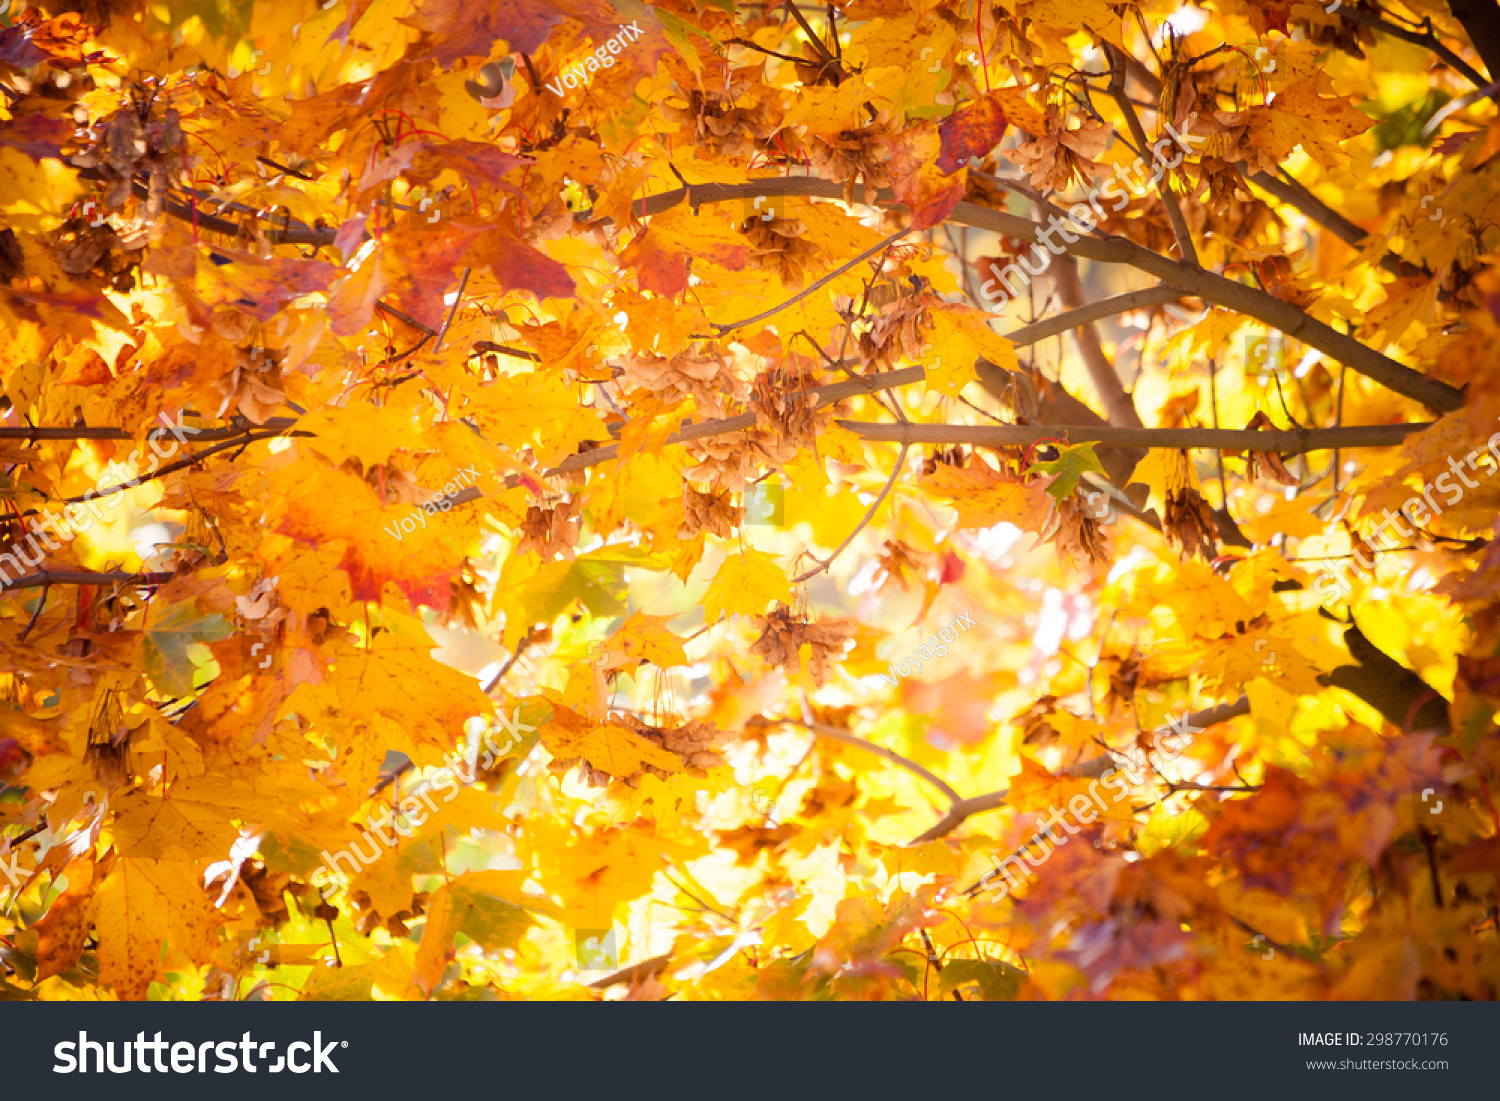 Bright Autumn Leaves Natural Environment Fall Stock Photo